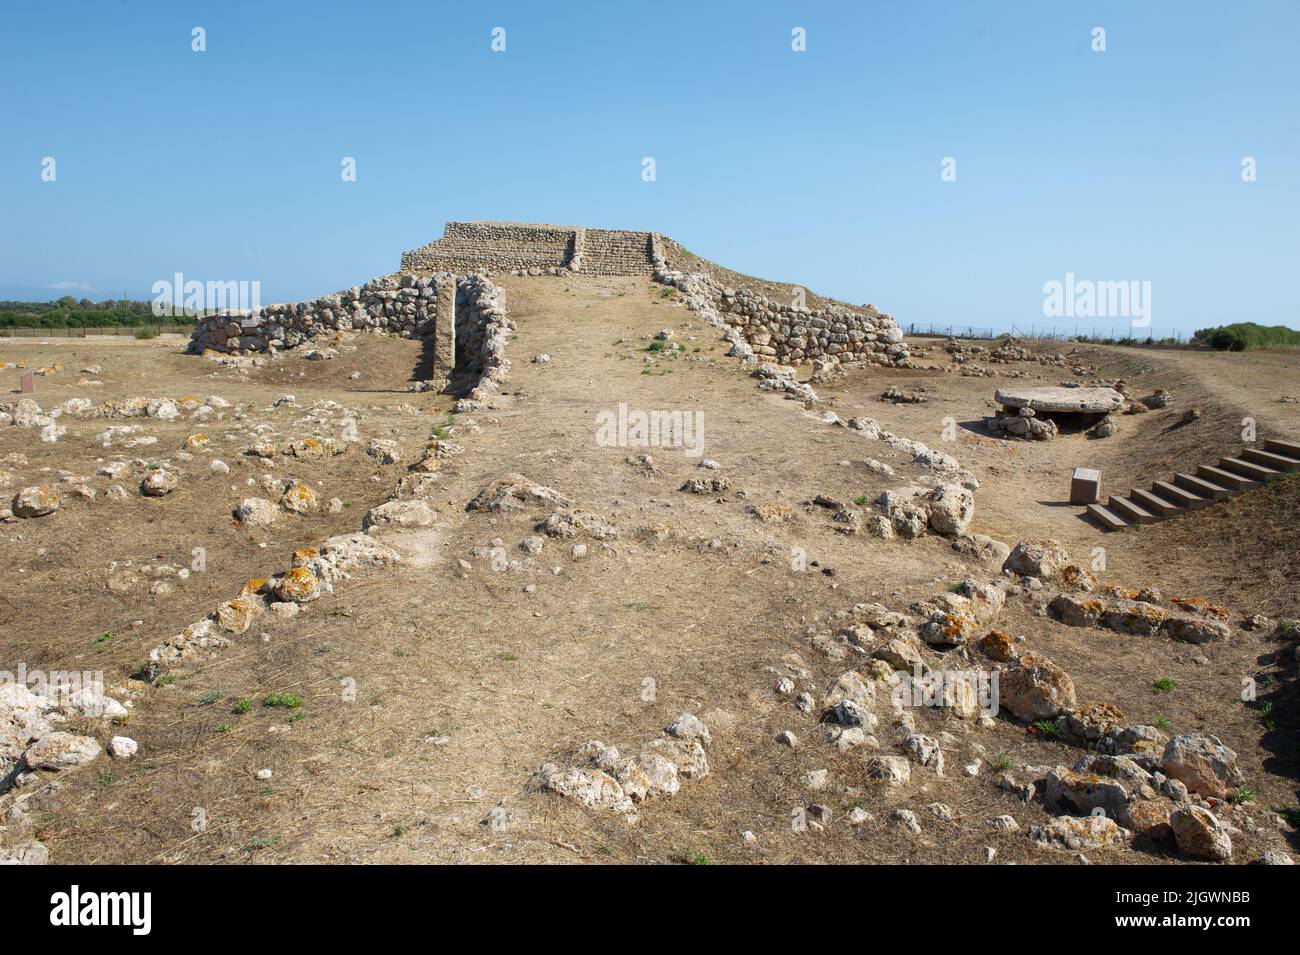 6 june 2021 - Europa, Italy, Sardinia Prehistoric altar Monte d'Accoddi is megalithic monument in Sassari,  Ruins of ancient step pyramid and a menhir Stock Photo